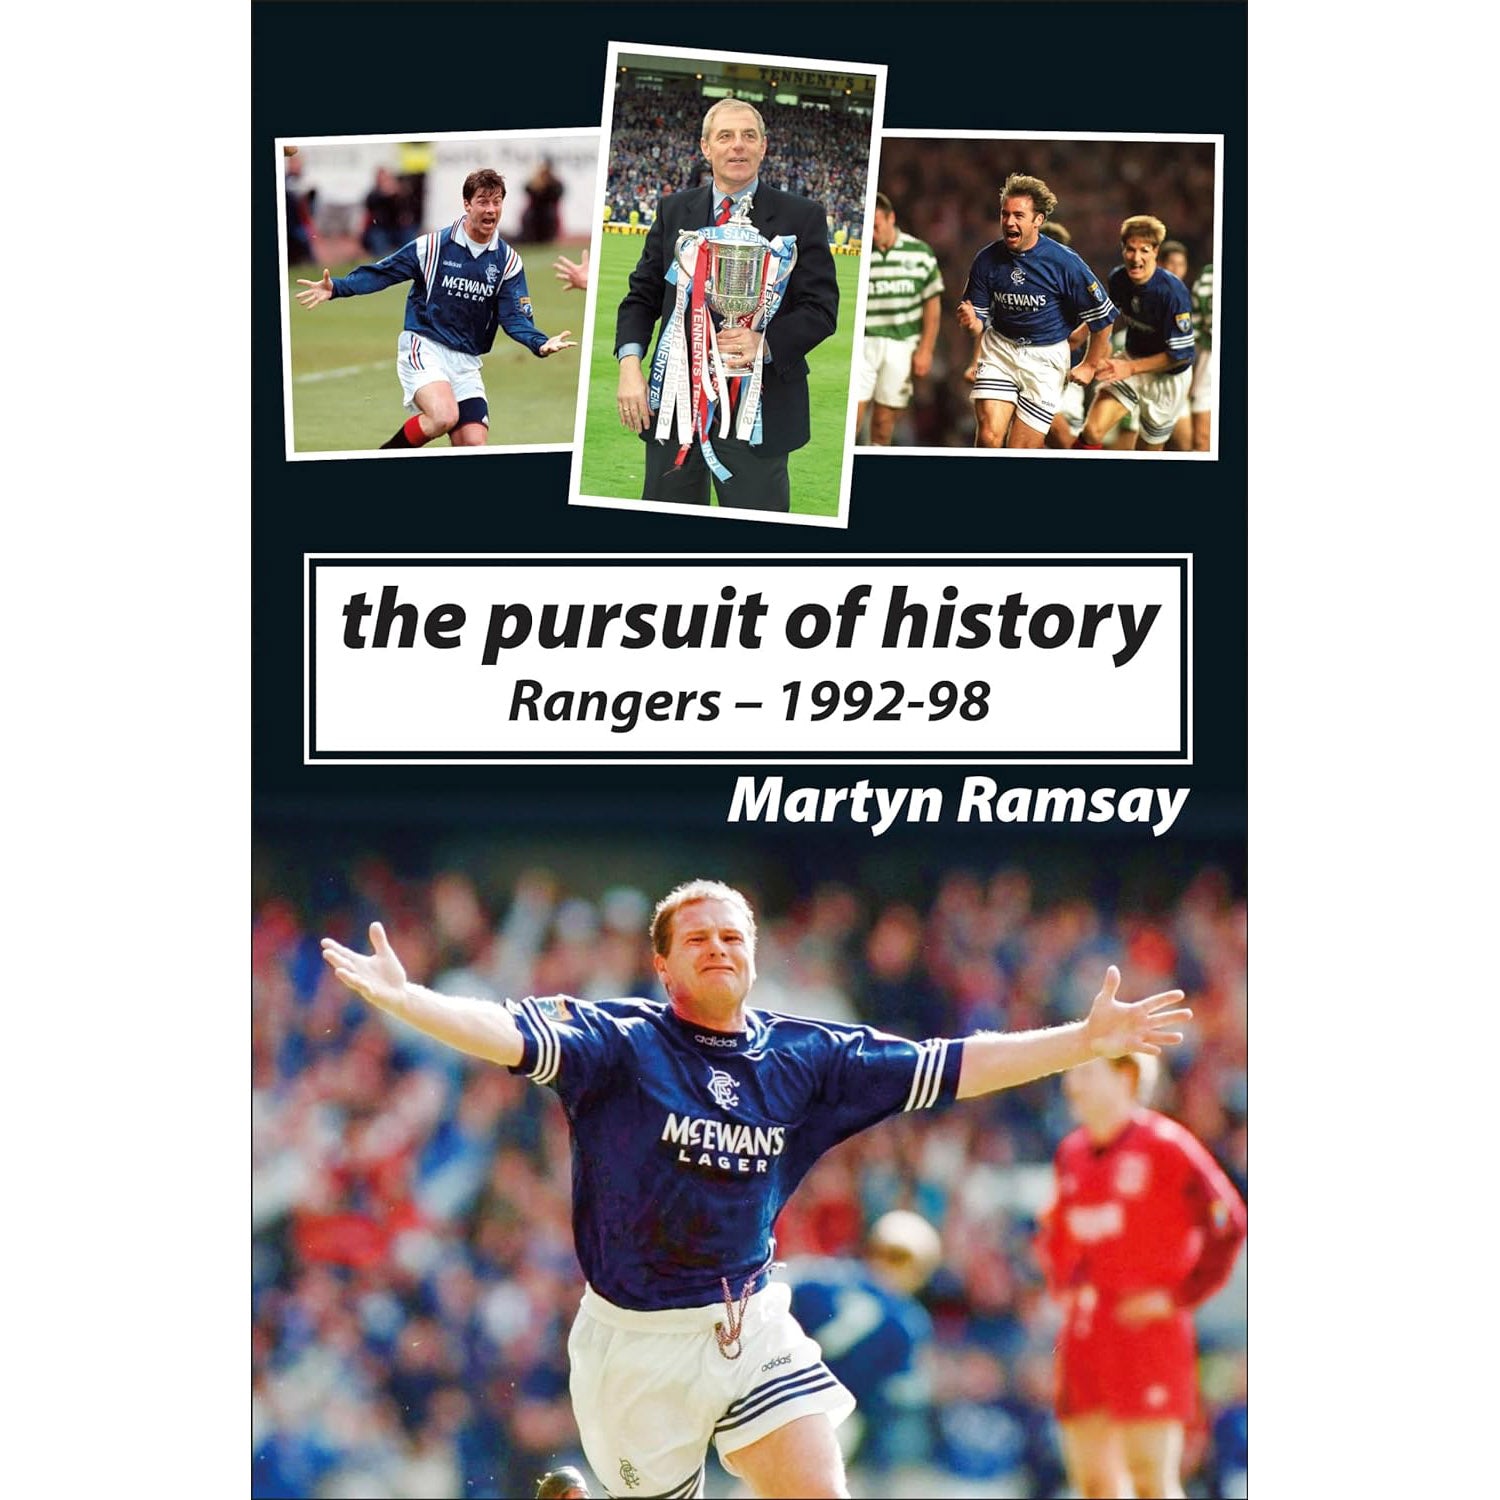 The Pursuit of History – Rangers – 1992-98